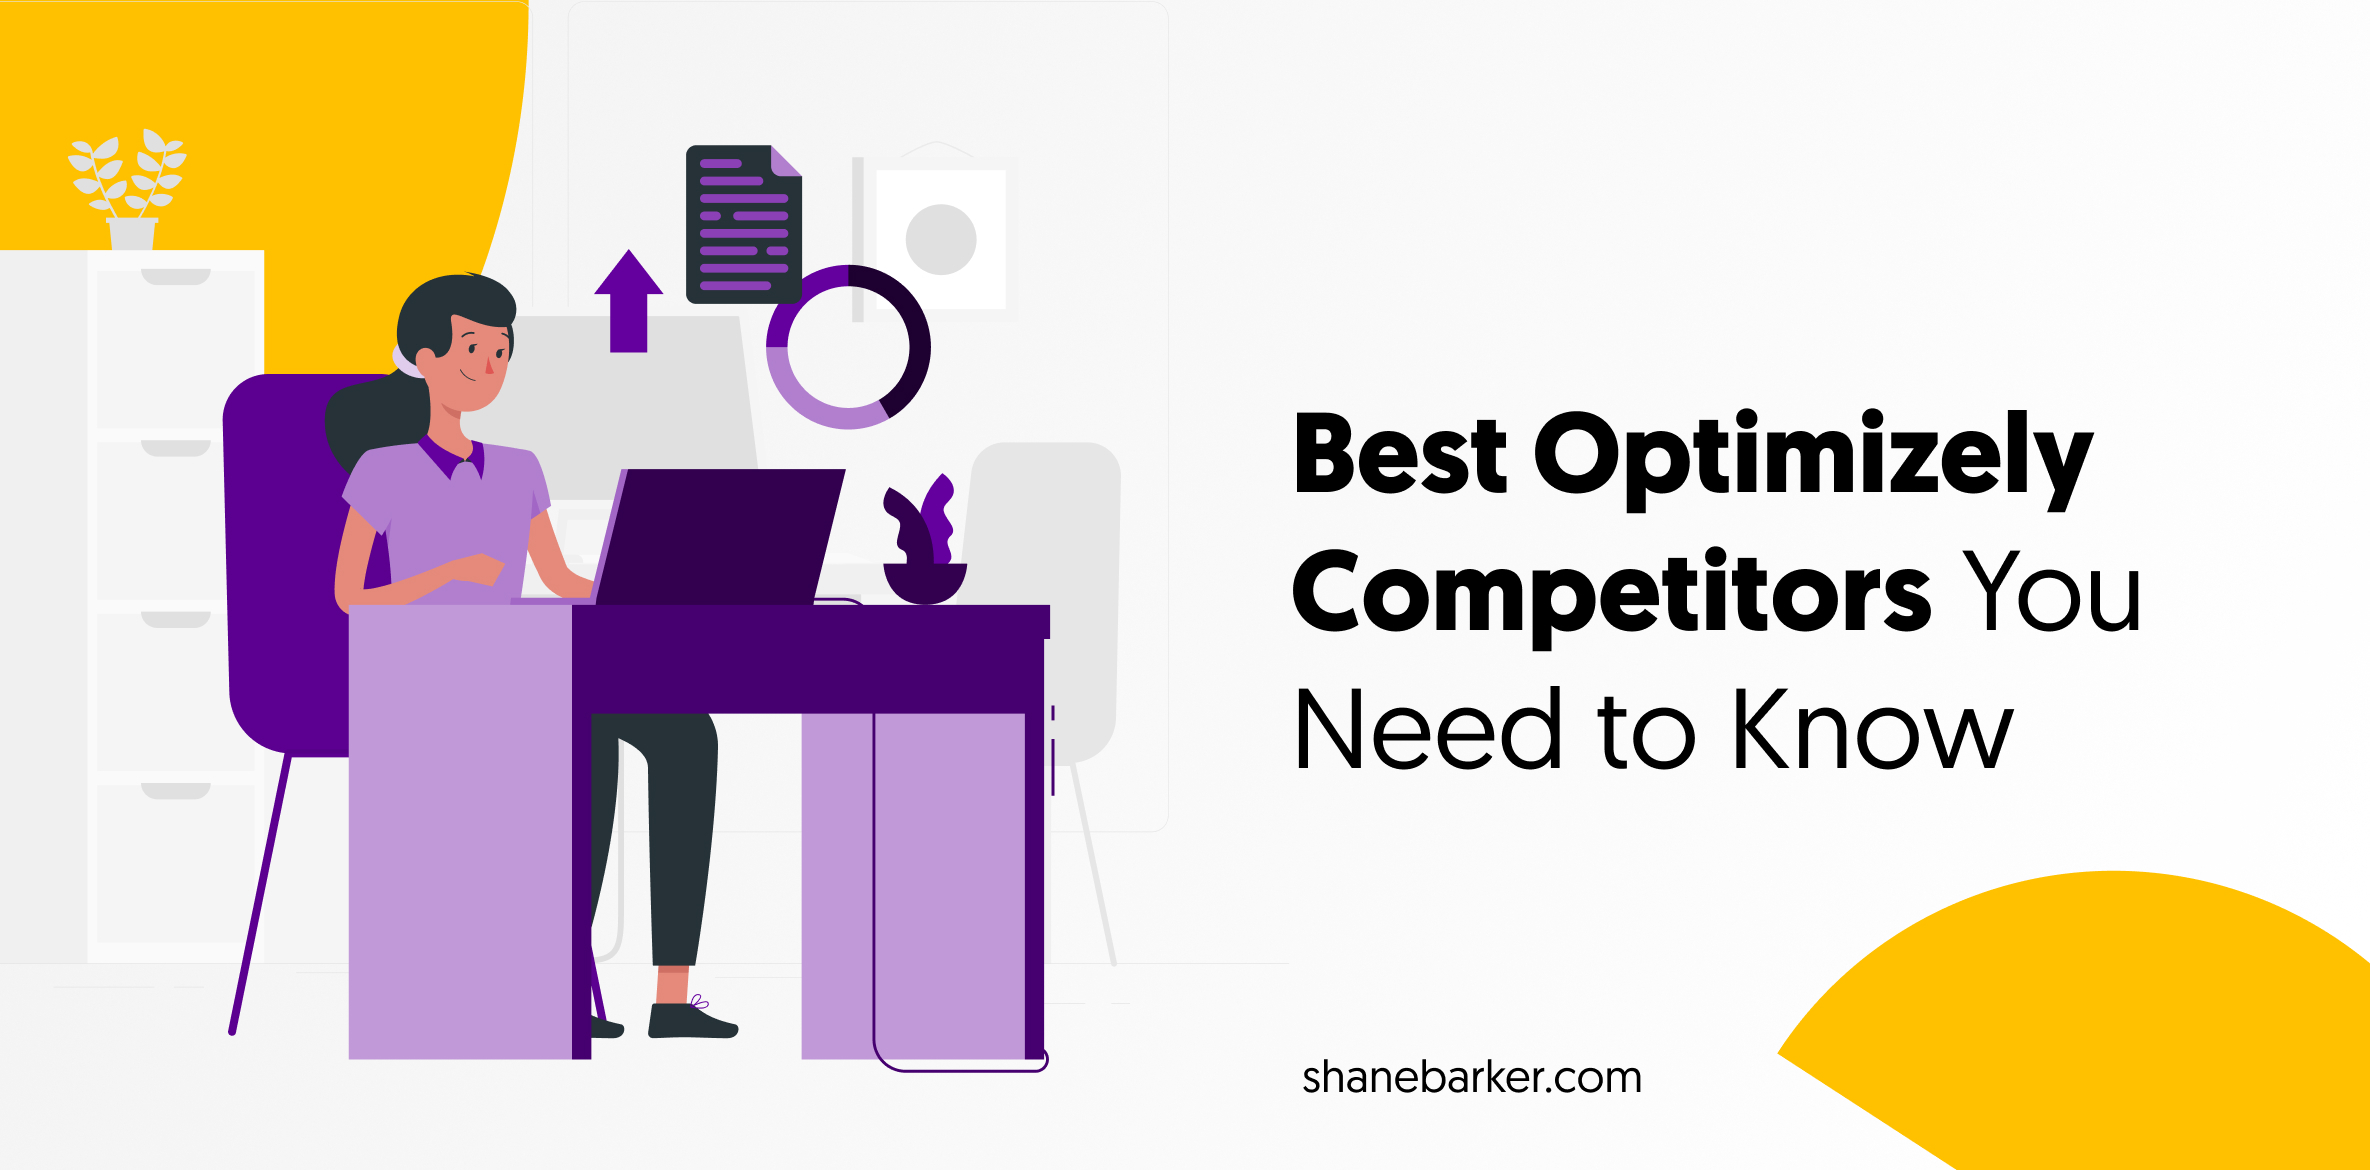 Best Optimizely Competitors You Need to Know